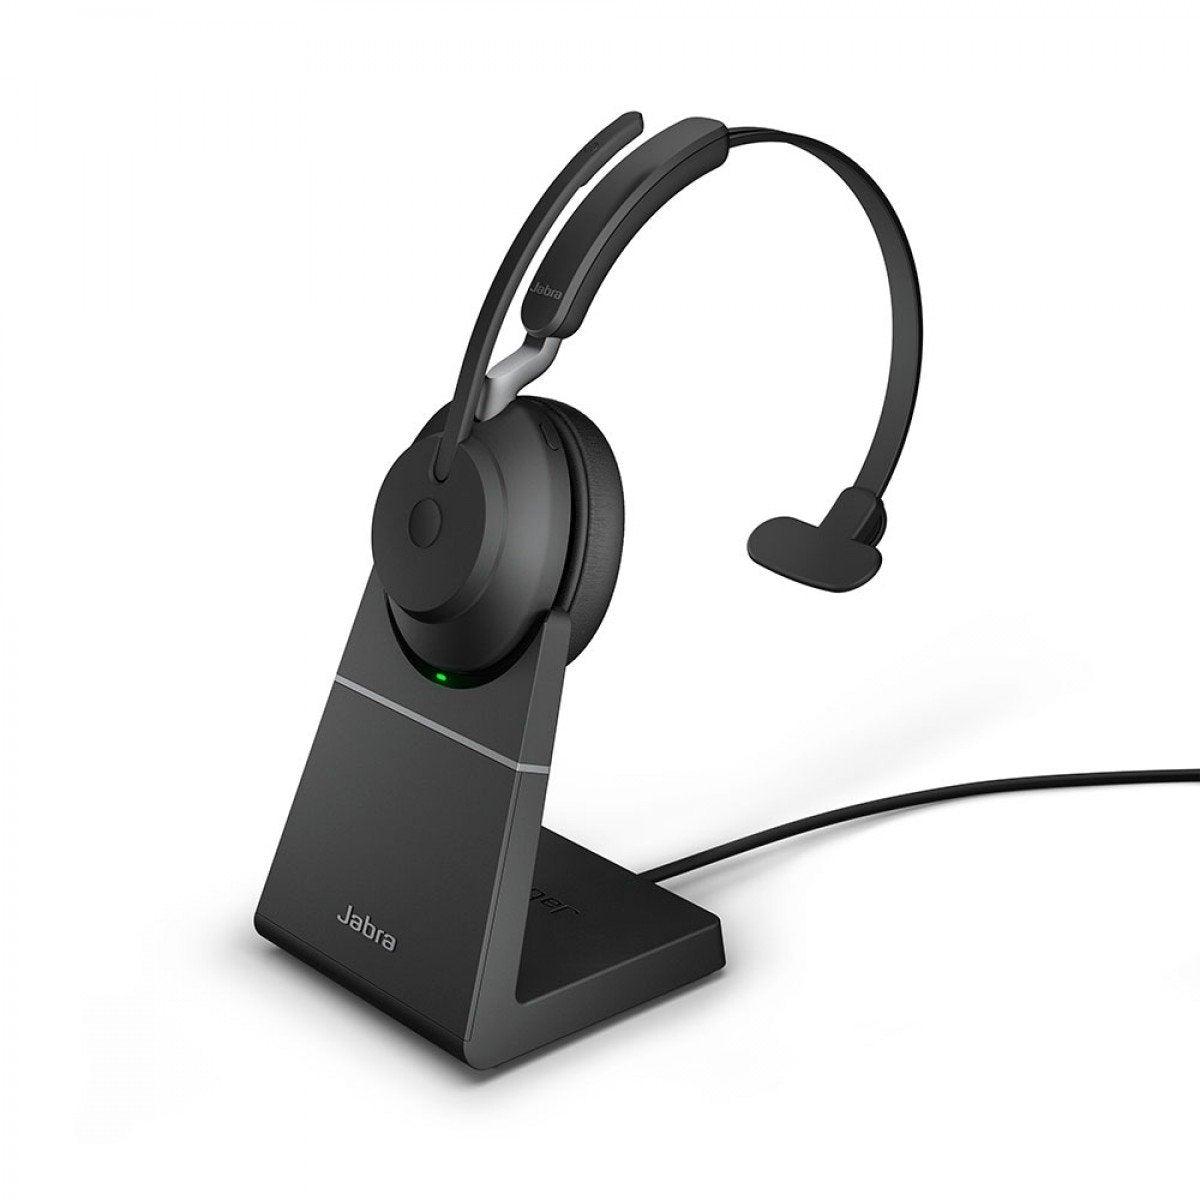 Yealink T54W Evolve2 65 Advanced Bluetooth Headset - Headsets4business